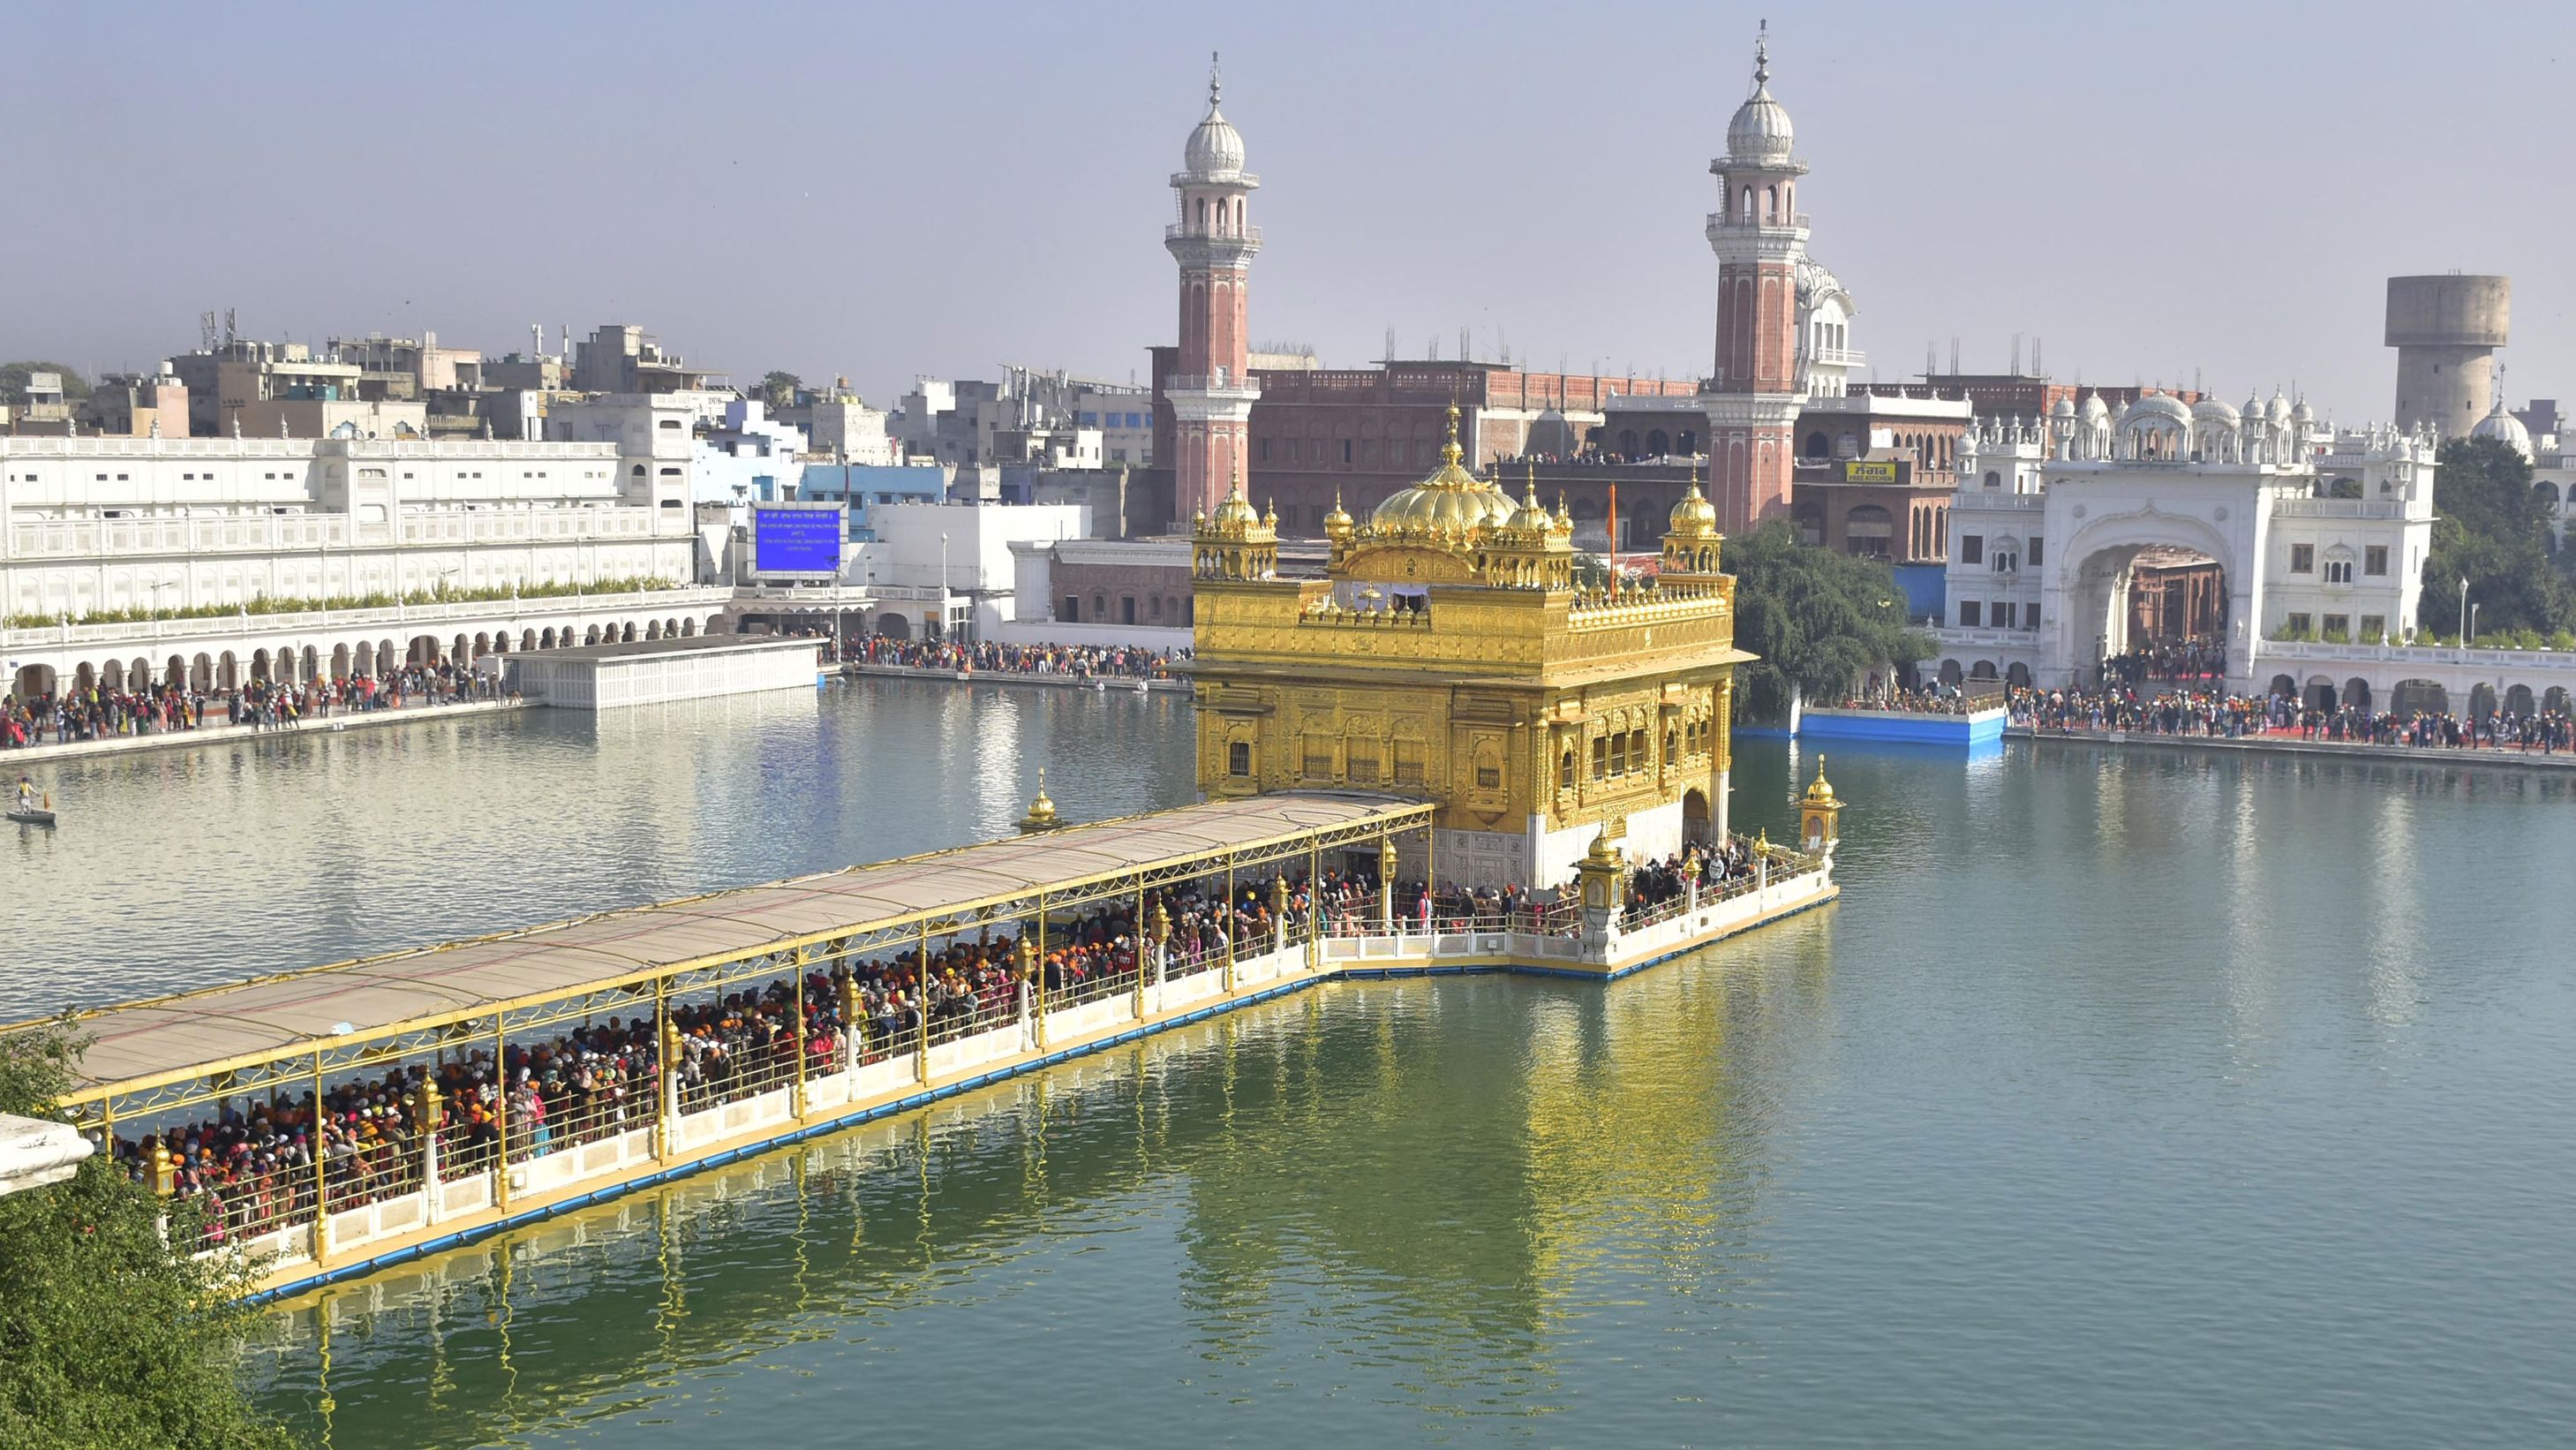 Devotees attend prayers at the Golden Temple in Amritsar, India on December 19, 2021.